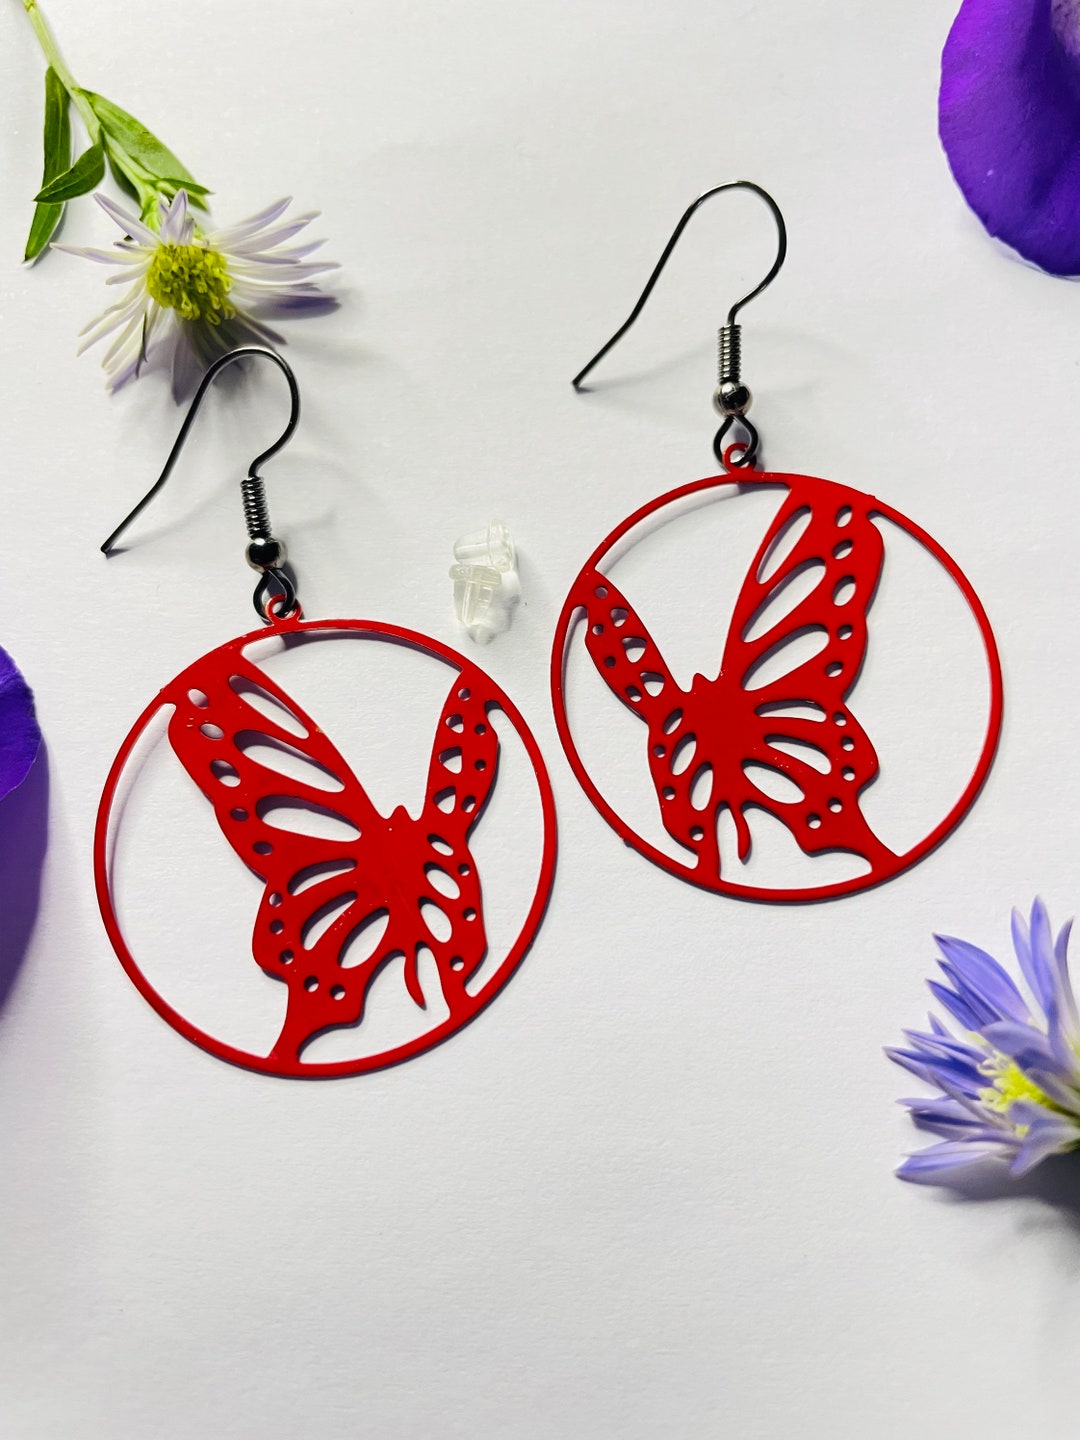 Tutorial for Paper Quilled Butterfly Earrings and by HoneysHive, $6.00 |  Paper quilling jewelry, Quilled jewellery, Quilling tutorial